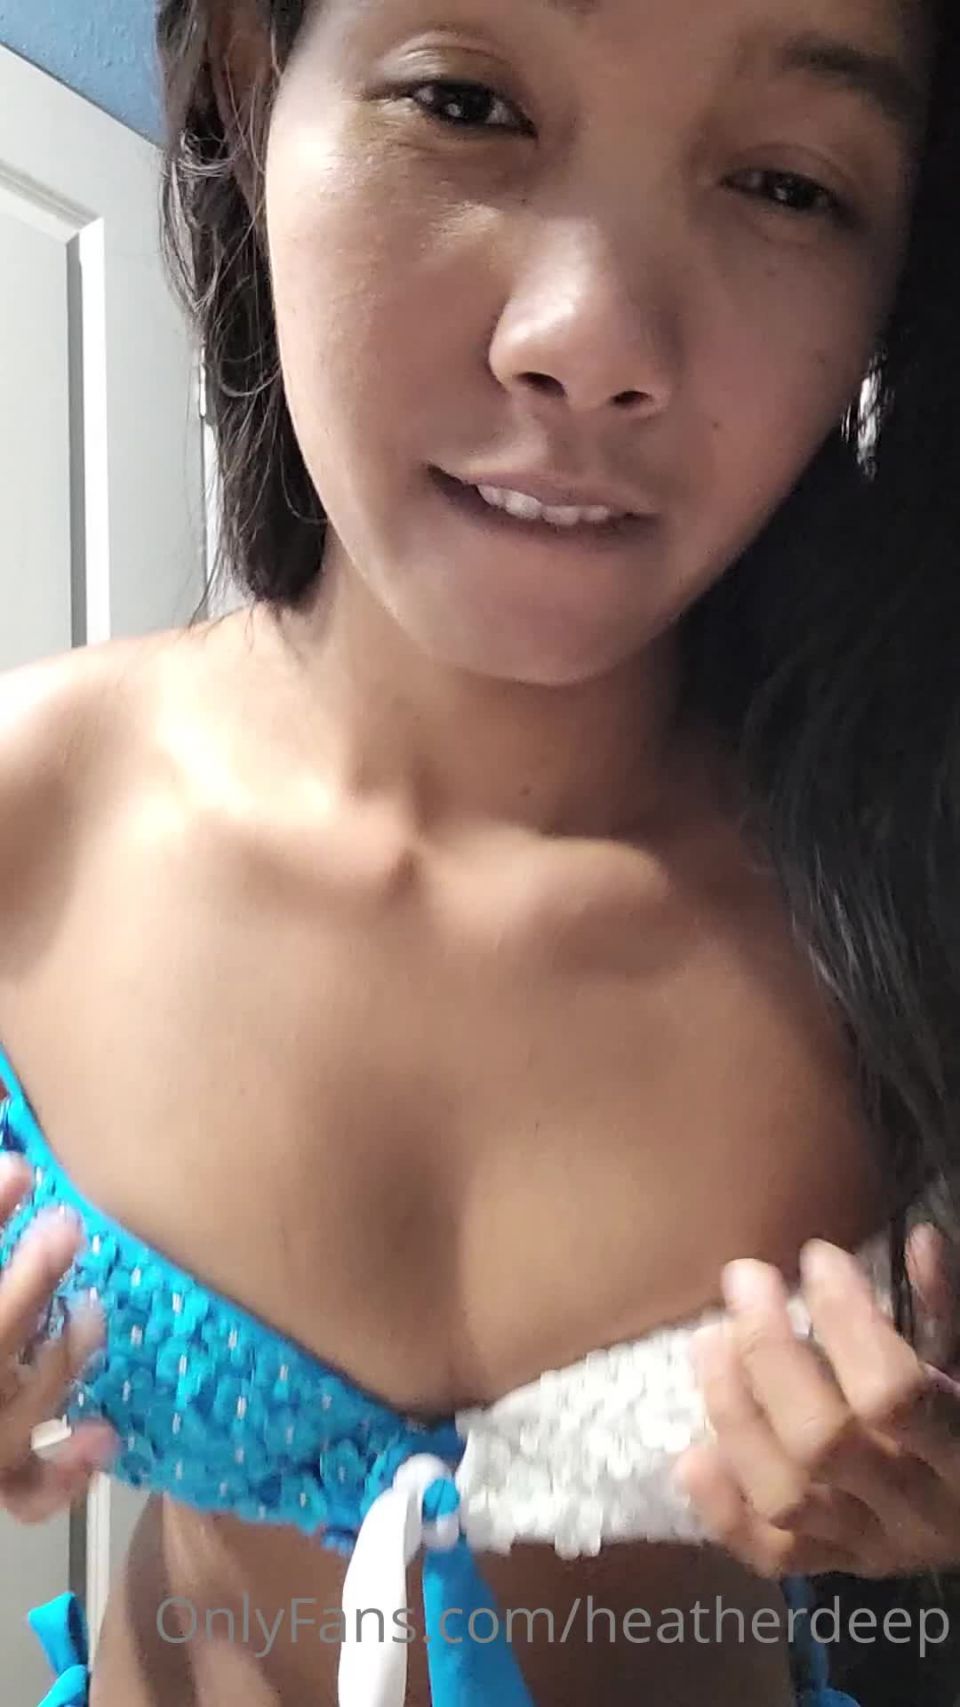 Heatherdeep () - my pussy need you babe come play with me pussy thaipussy tightpussy wetpuss 20-10-2021